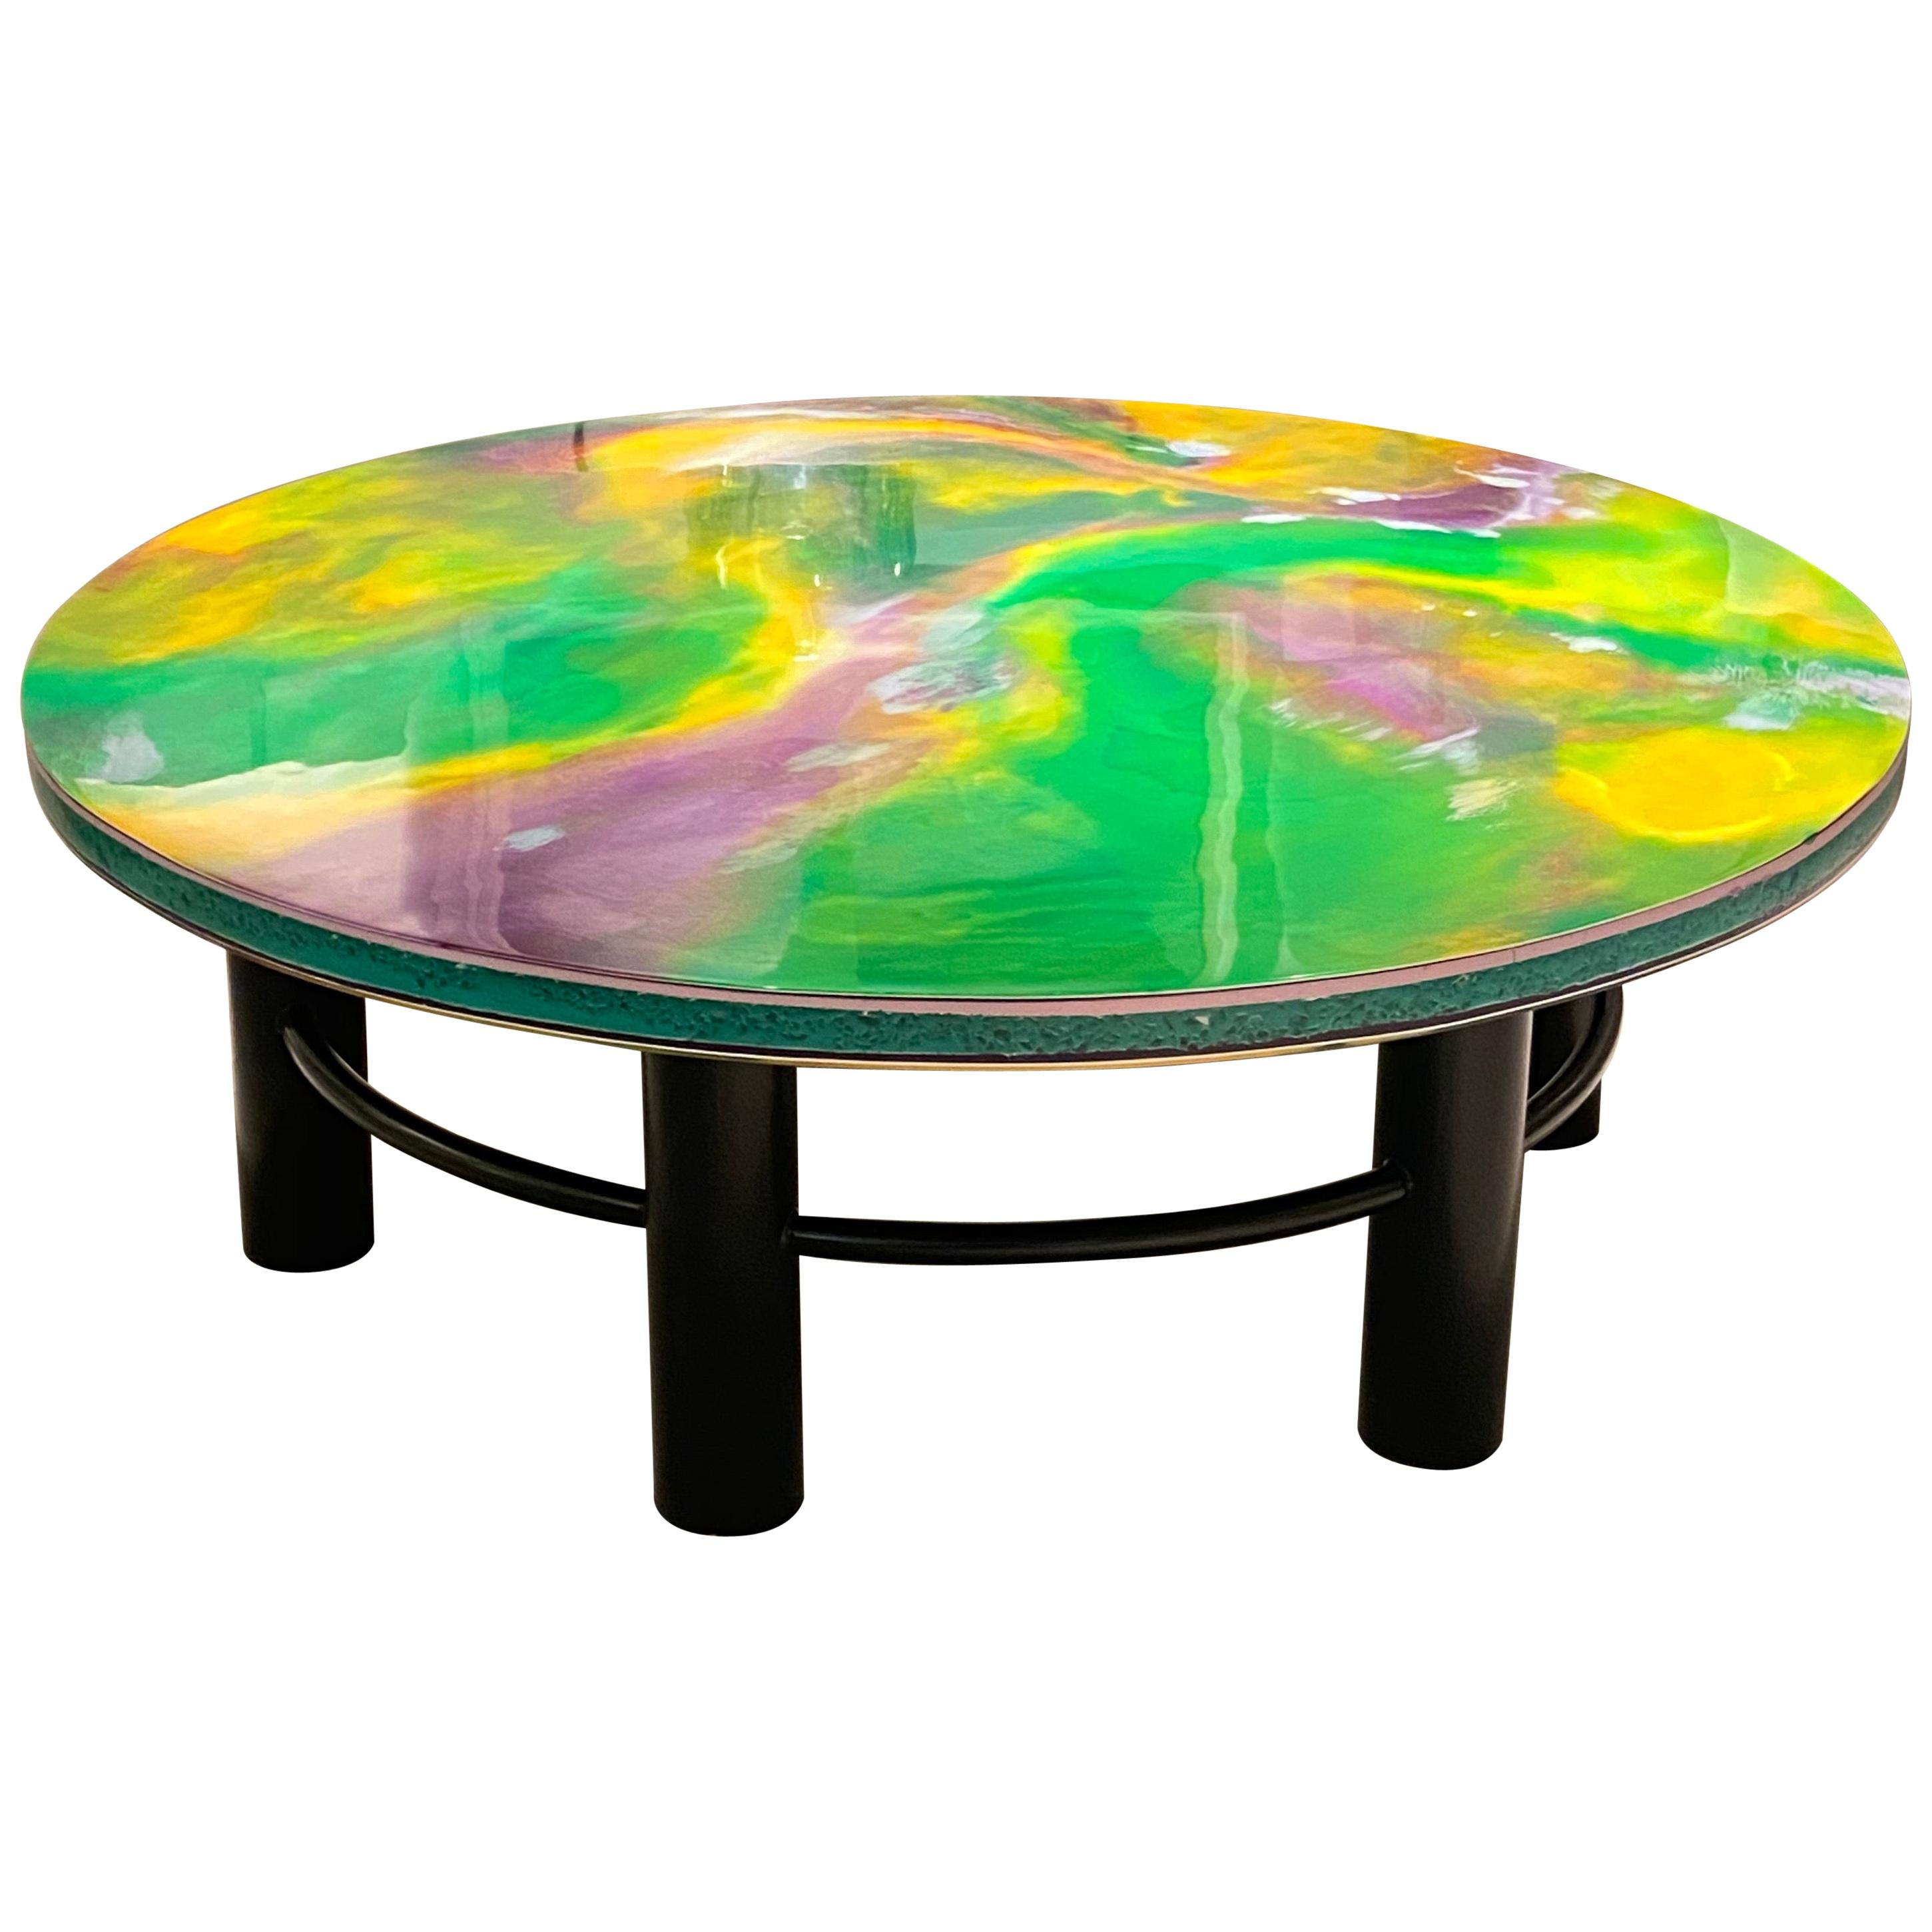 1970s Resin Coffee Table by Pierre Giraudon